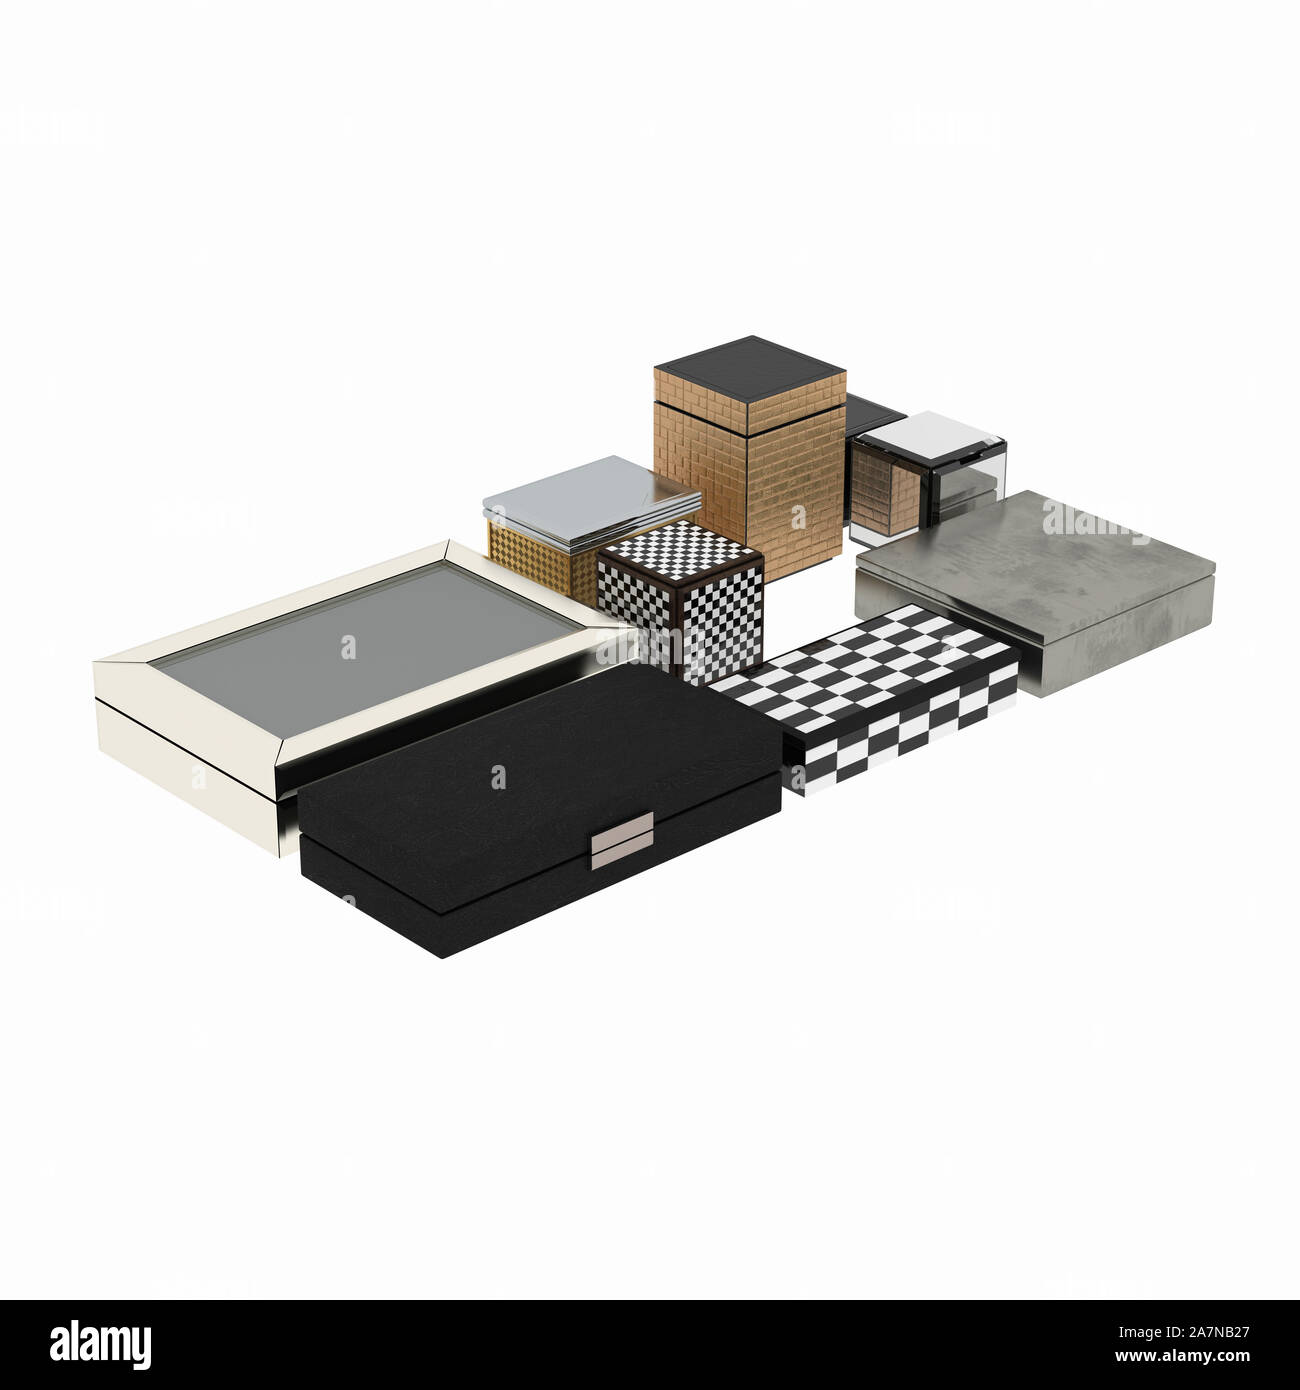 3d render of shopping boxes Stock Photo